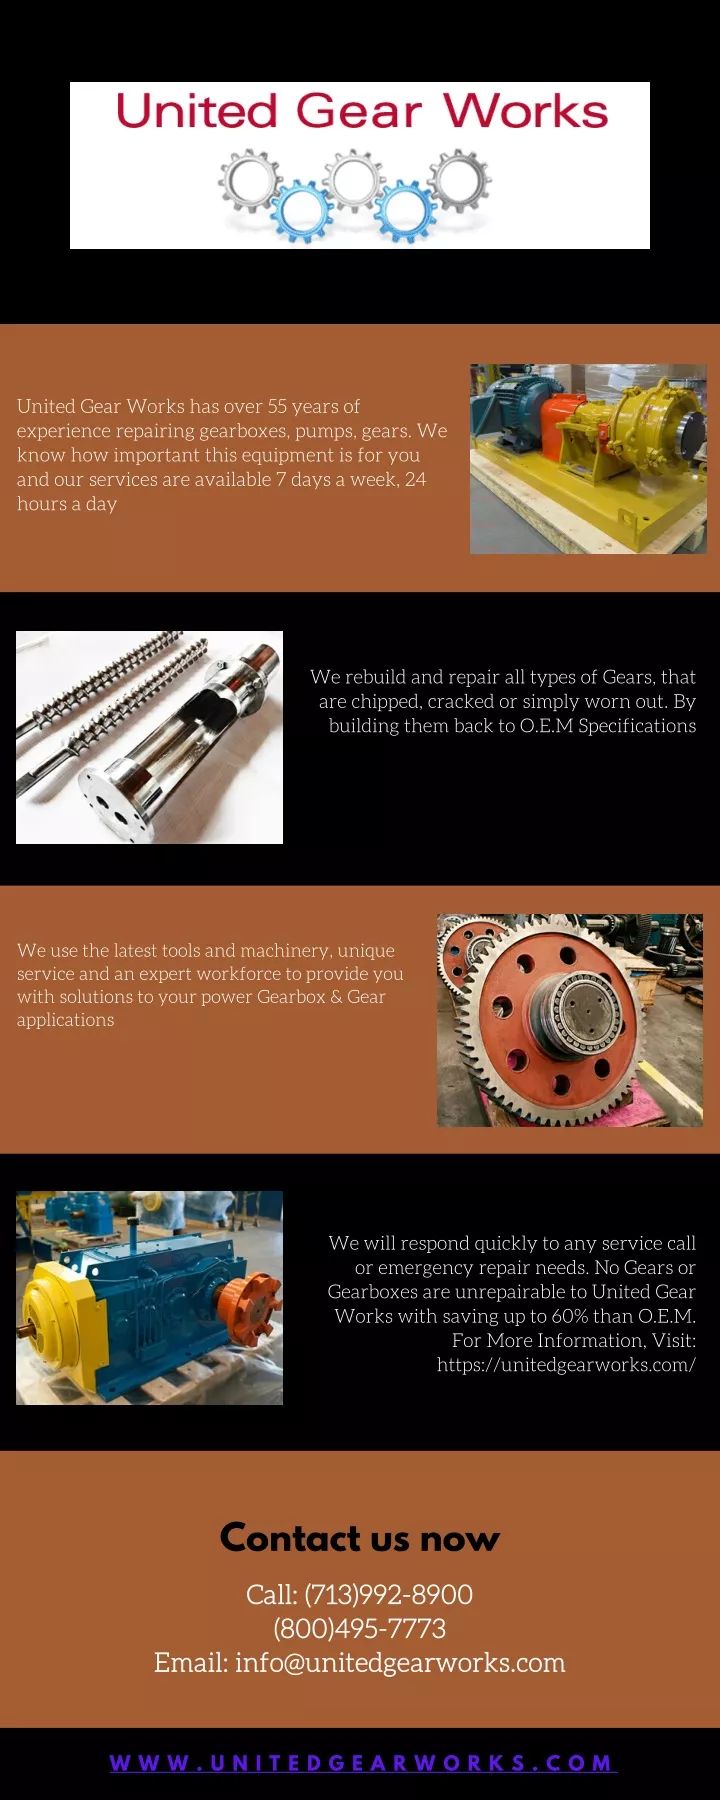 united gear works has over 55 years of experience